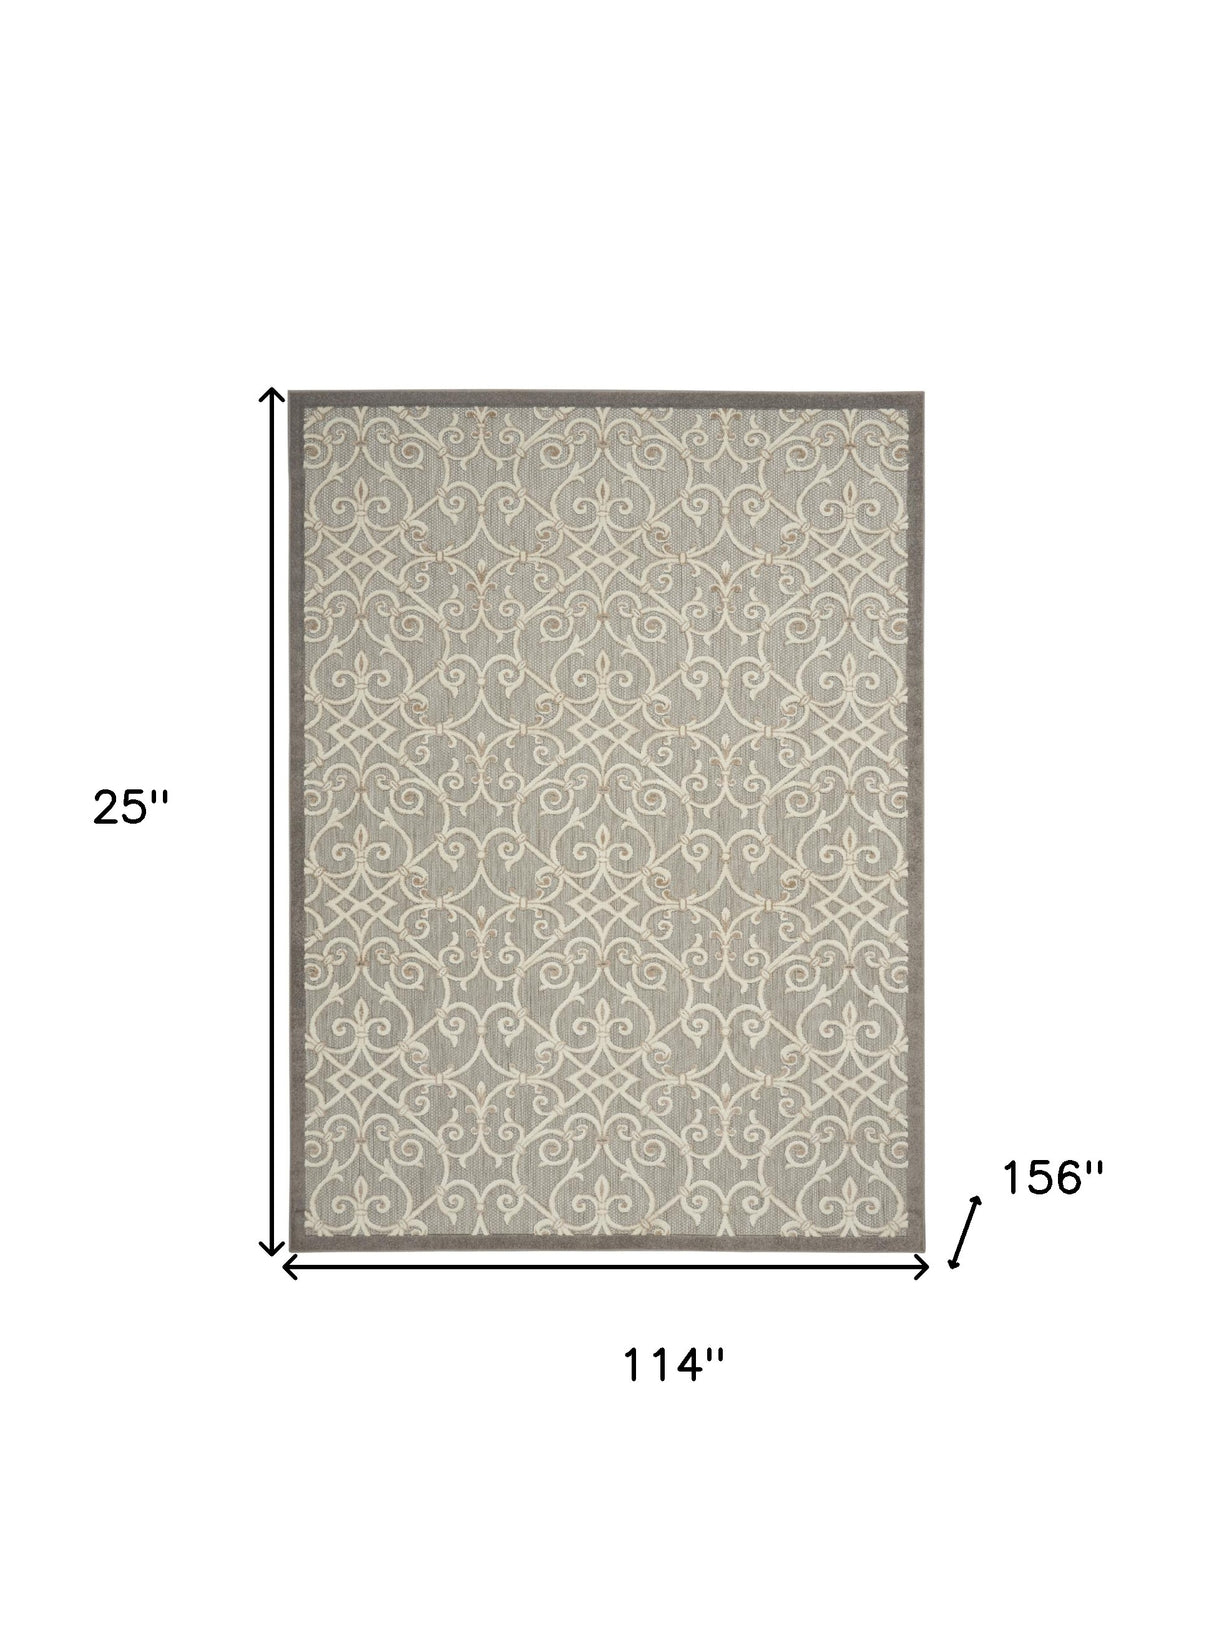 10' X 13' Natural Damask Non Skid Indoor Outdoor Area Rug